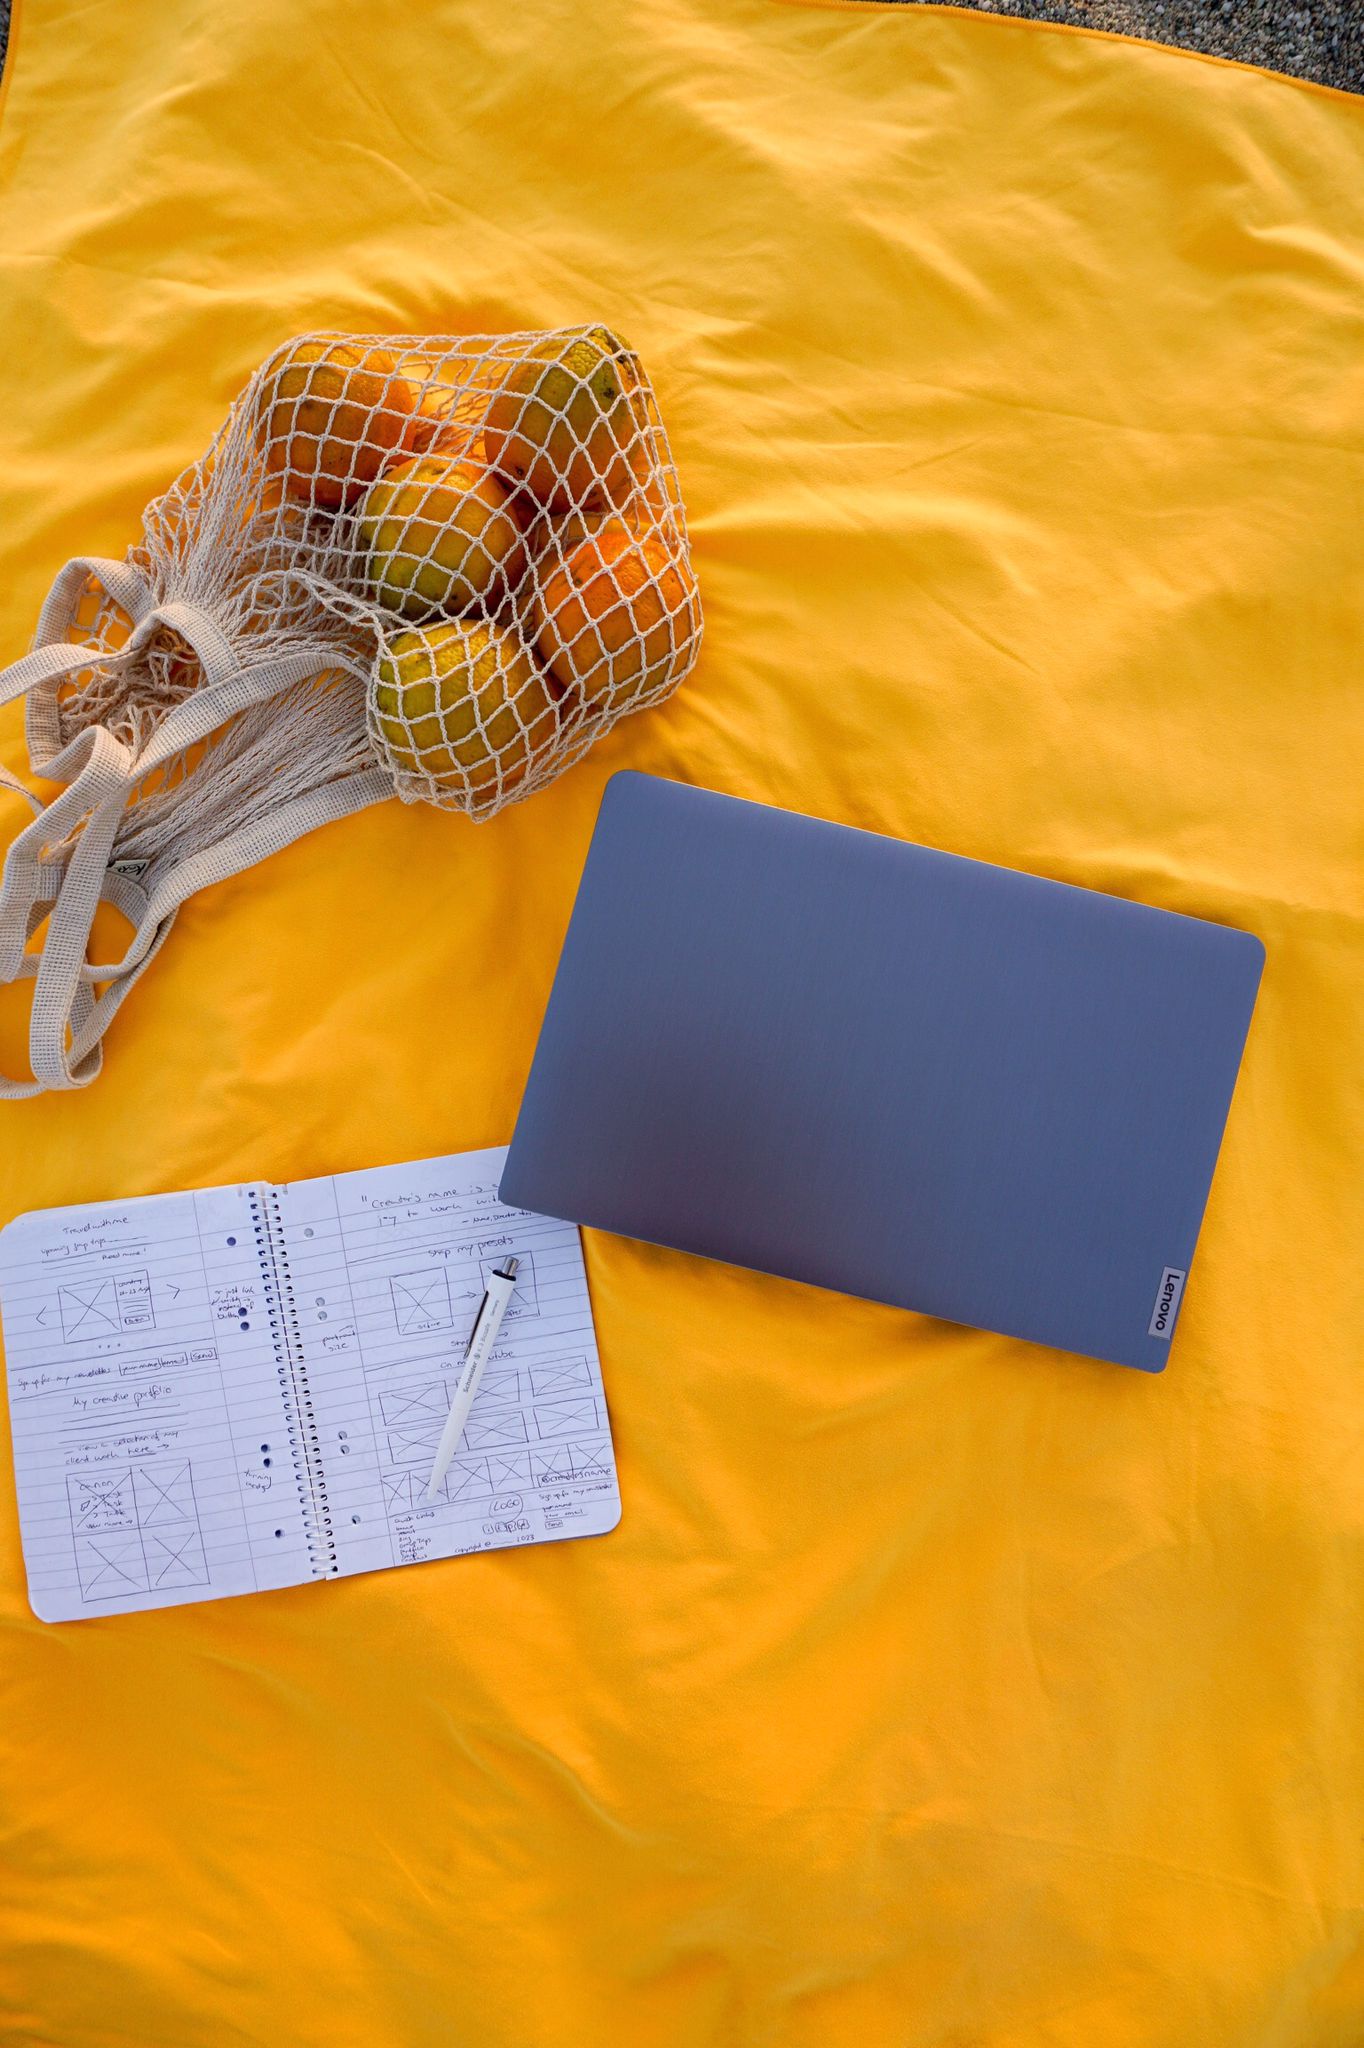 Laptop, bag of oranges & notebook on a yellow beach towel